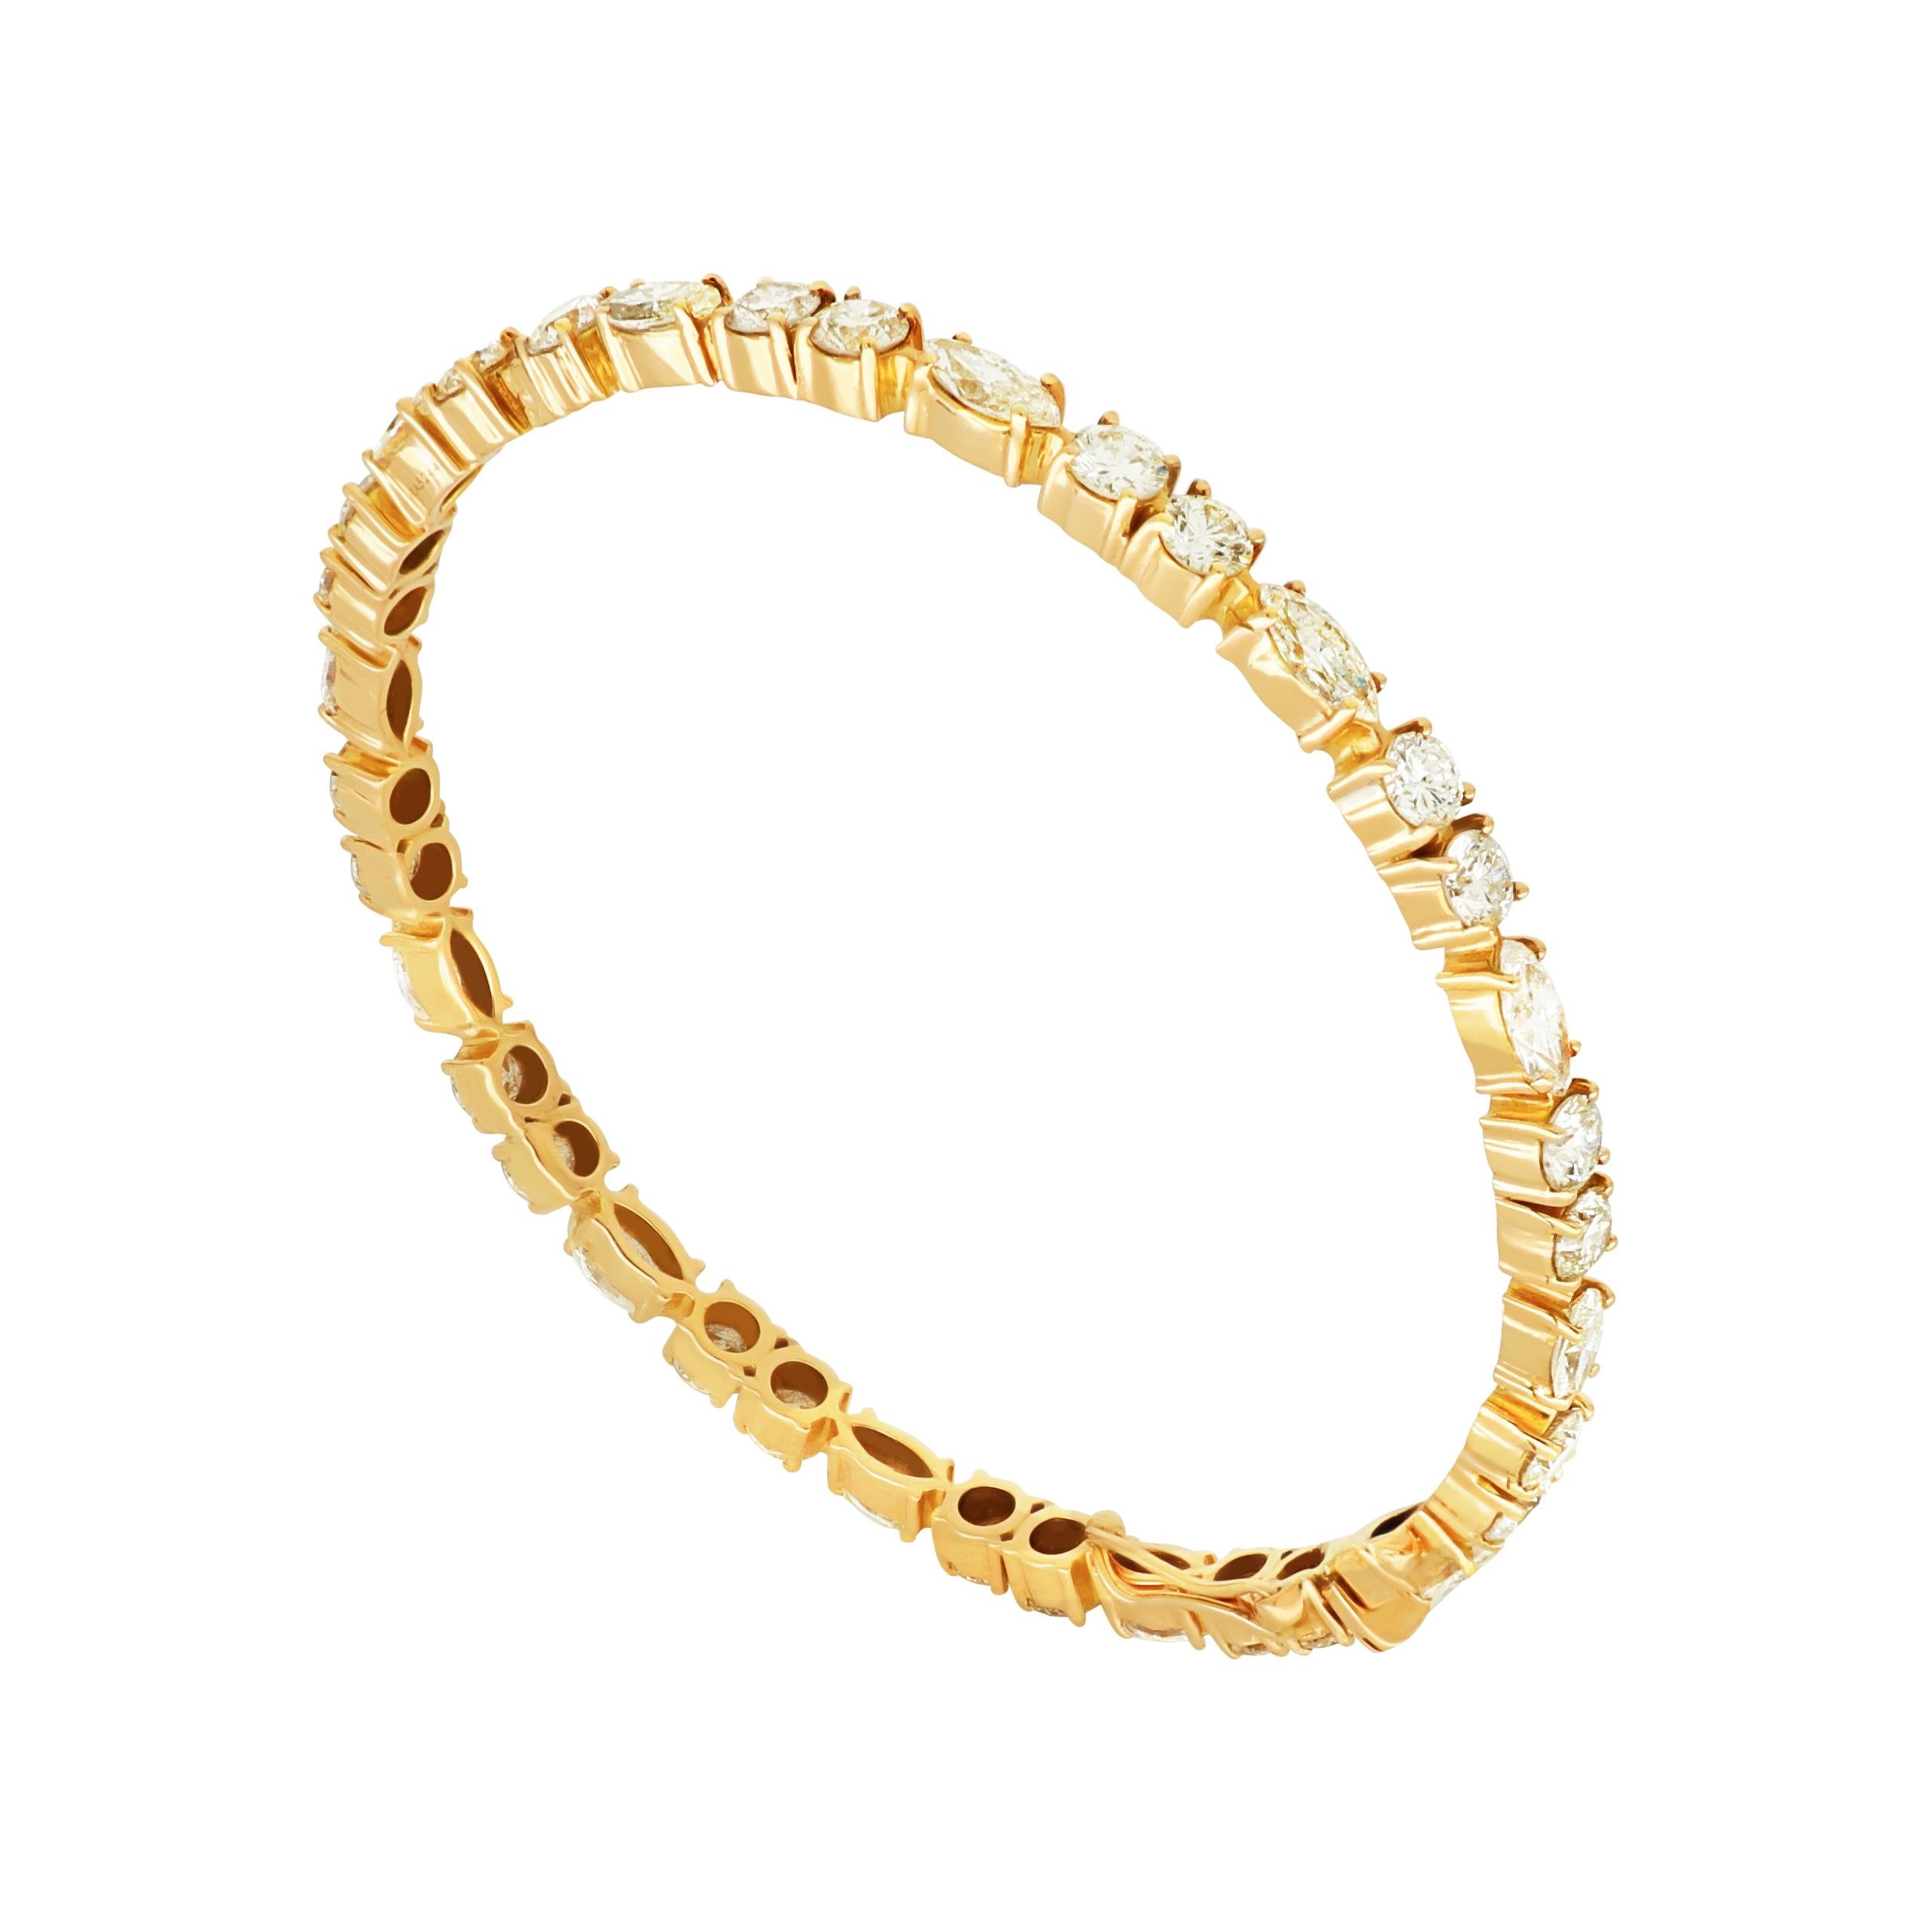 A contemporary line 18 karat yellow gold bangle featuring the round cut diamonds, punctuated by marquise diamonds to form a seamless stream of scintillation around the wrist. 
Diamonds (Total Carat Weight: 7.48 ct) 
18 Karat Yellow Gold
Bangle Size: